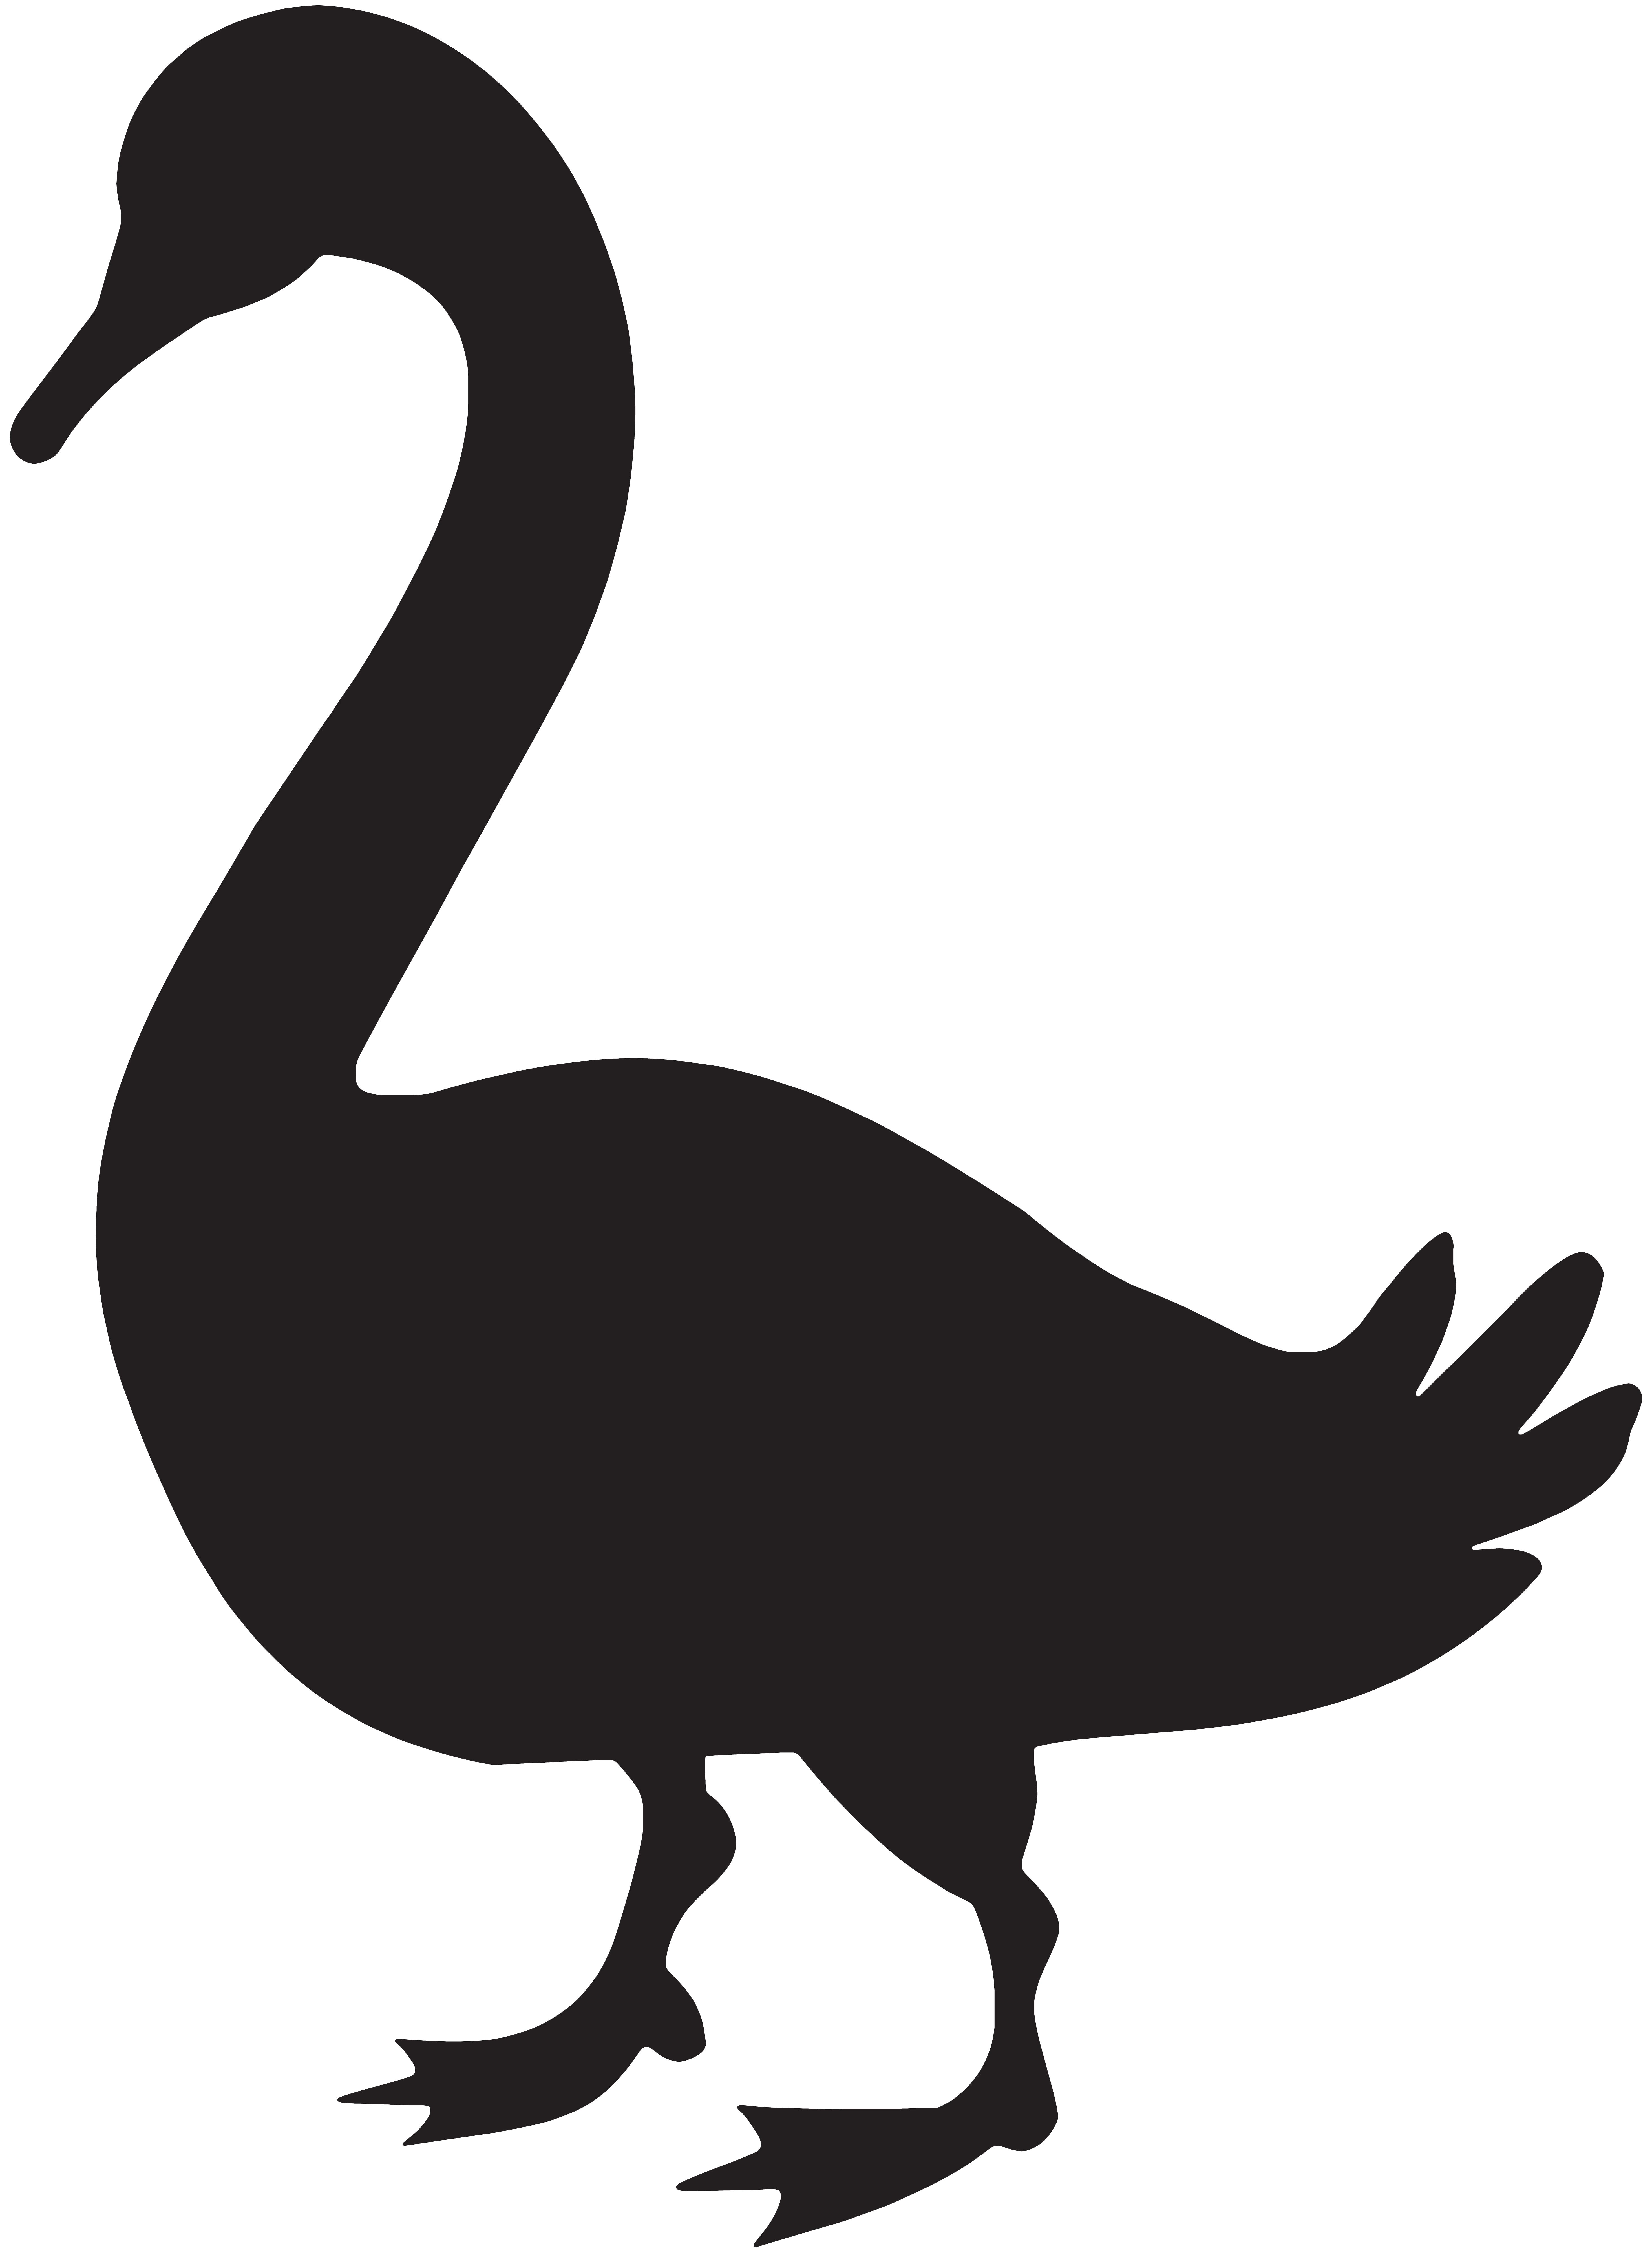 Goose Silhouette PNG Clip Art Image